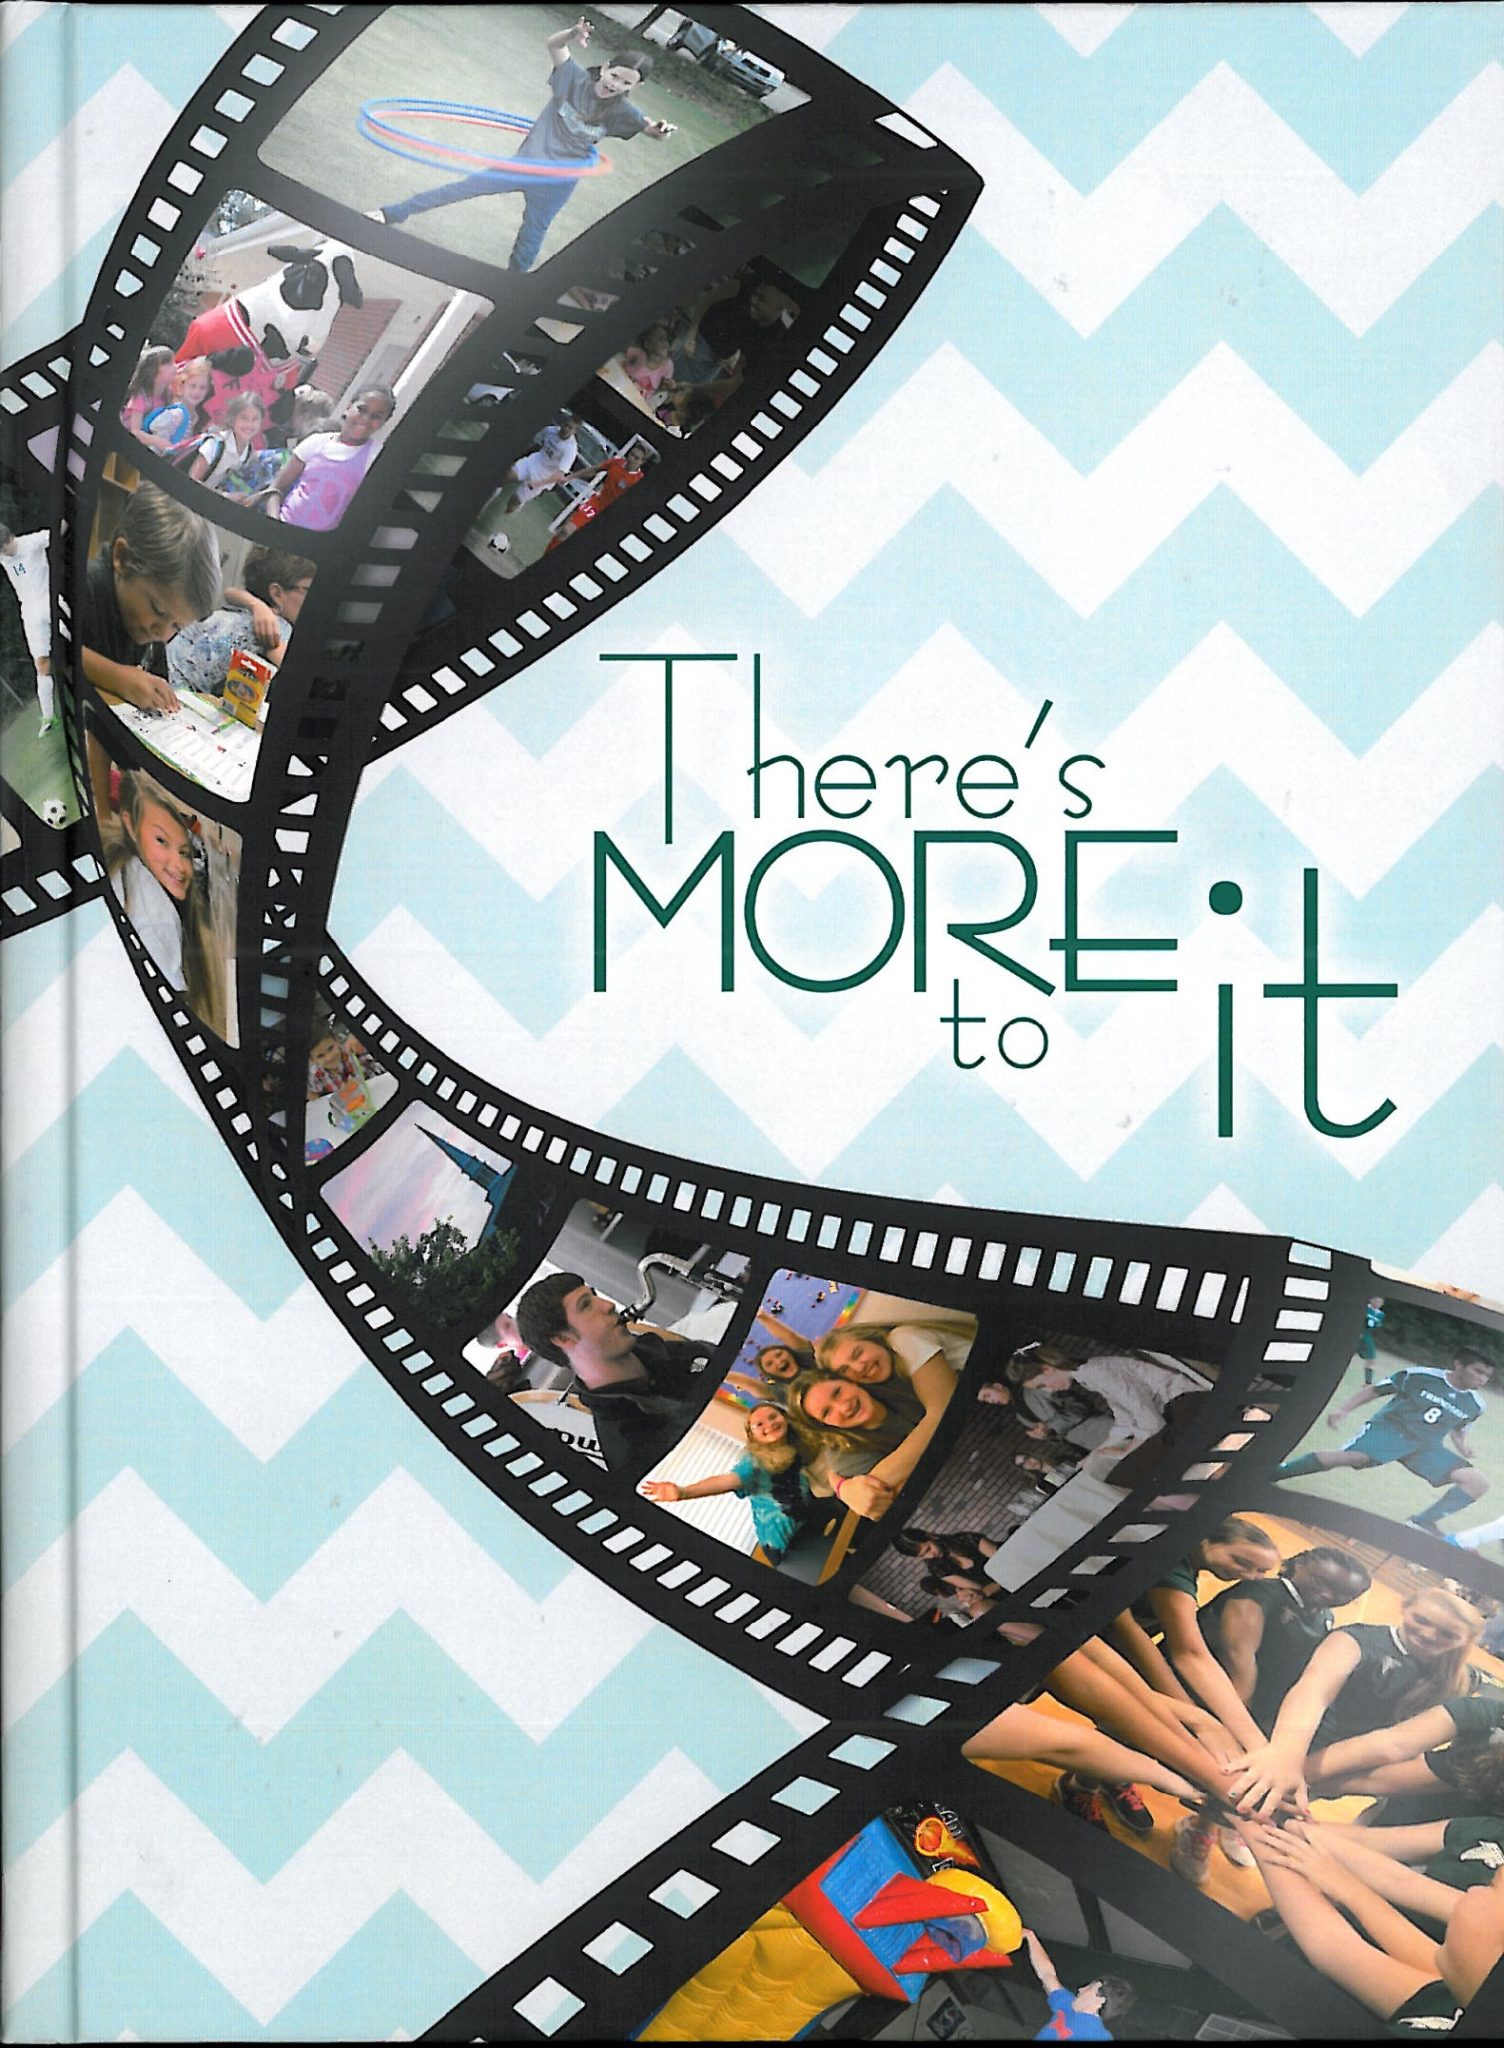 2013-2014 Yearbook Cover